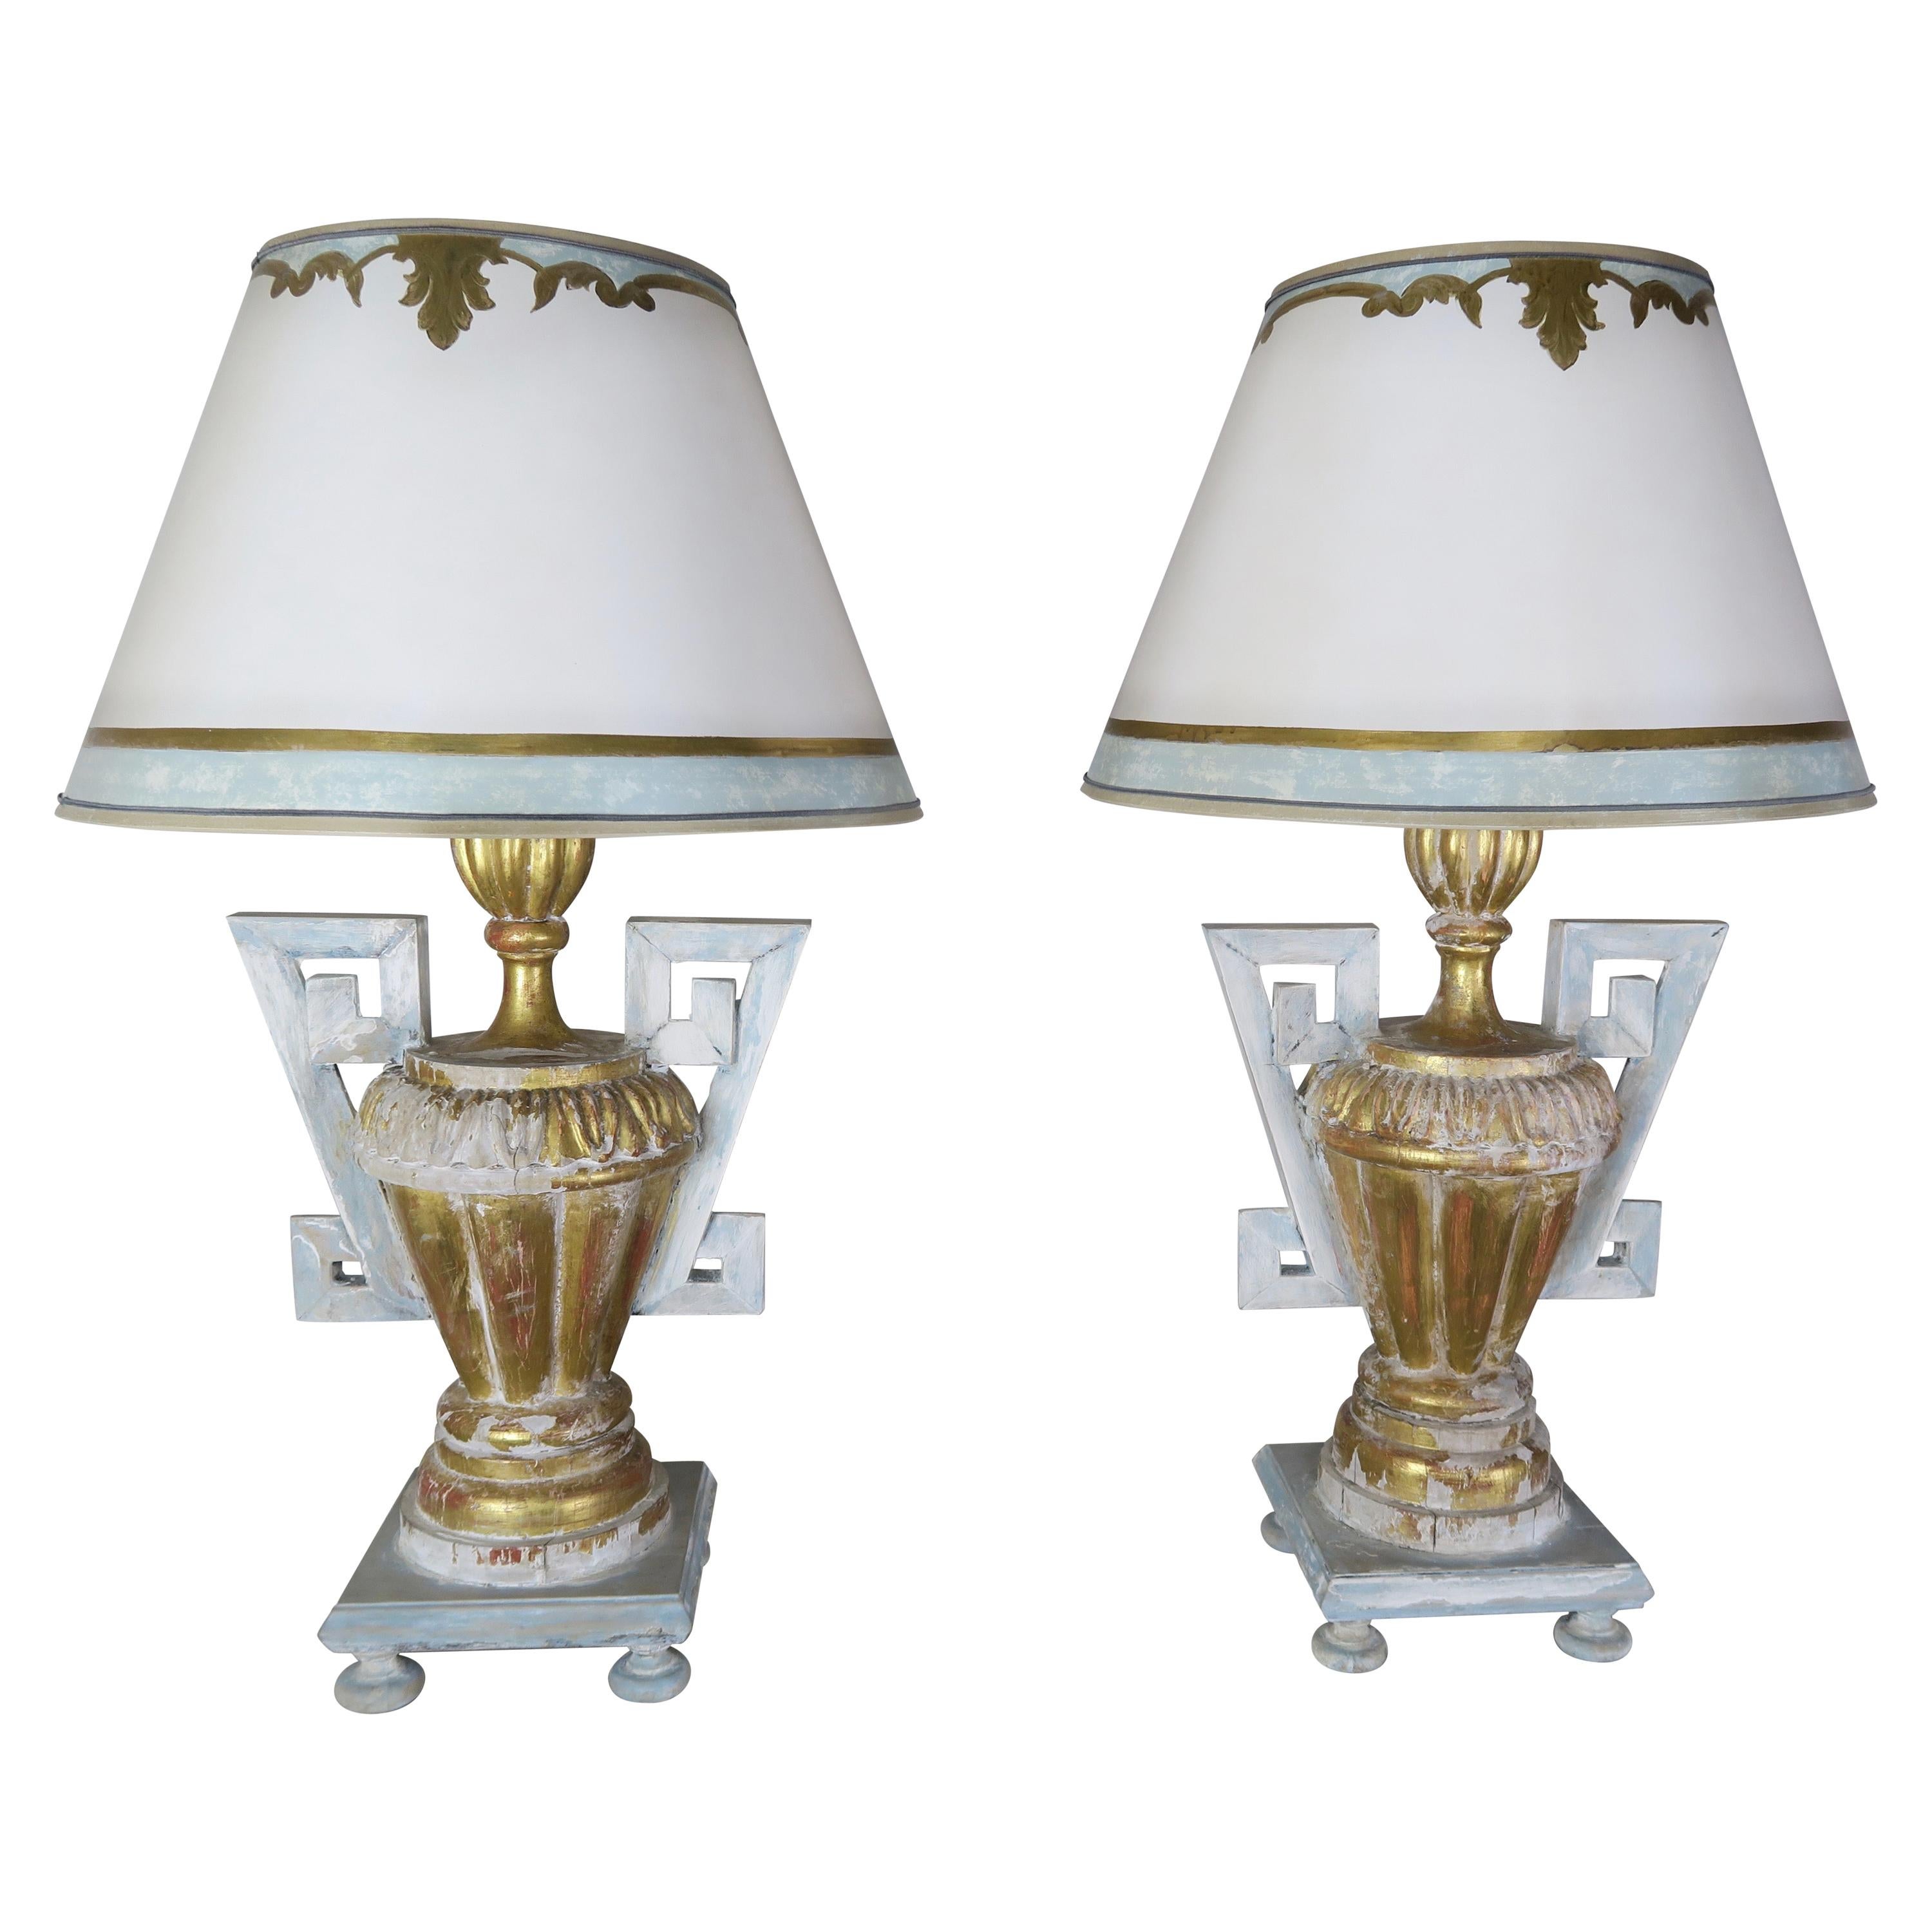 Pair of Greek Key Painted Lamps with Parchment Shades For Sale